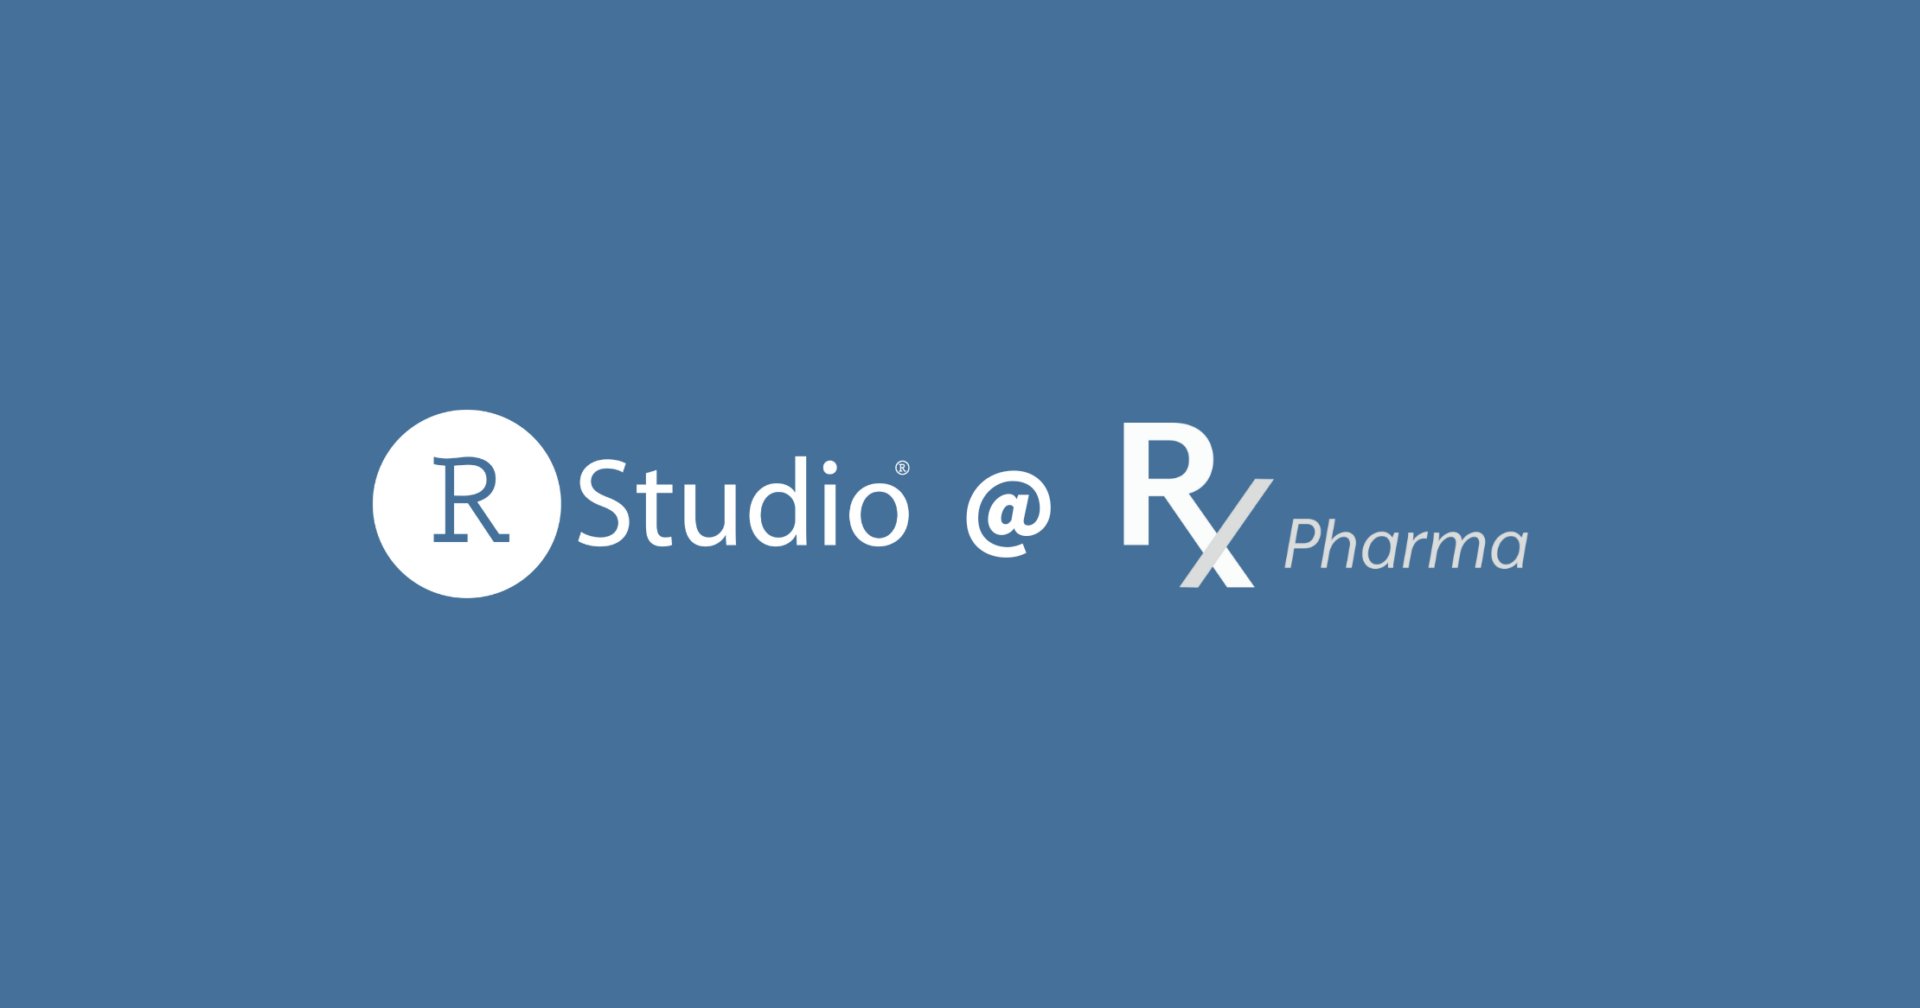 RStudio logo, the at symbol, and the R in Pharma conference logo.